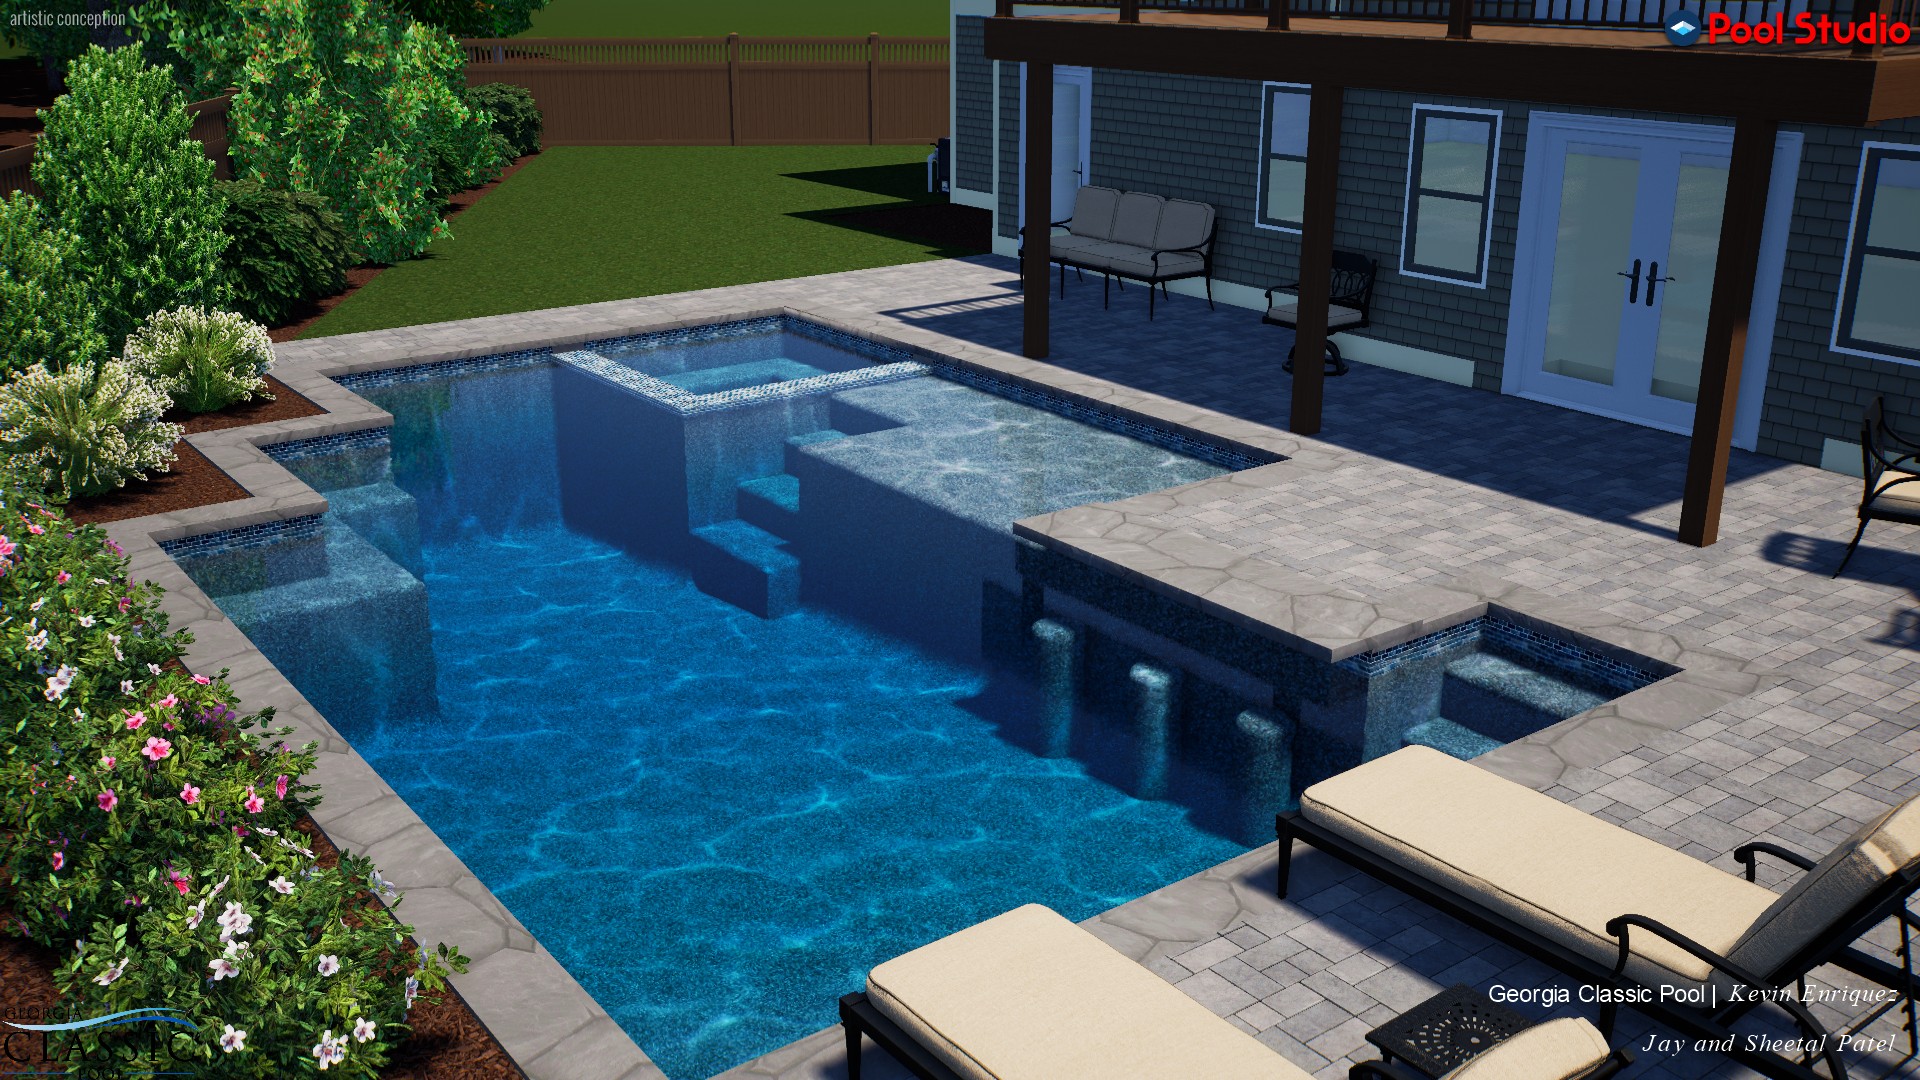 A luxurious 3D swimming pool design featuring sleek barstools, offering a chic and comfortable space for poolside relaxation.